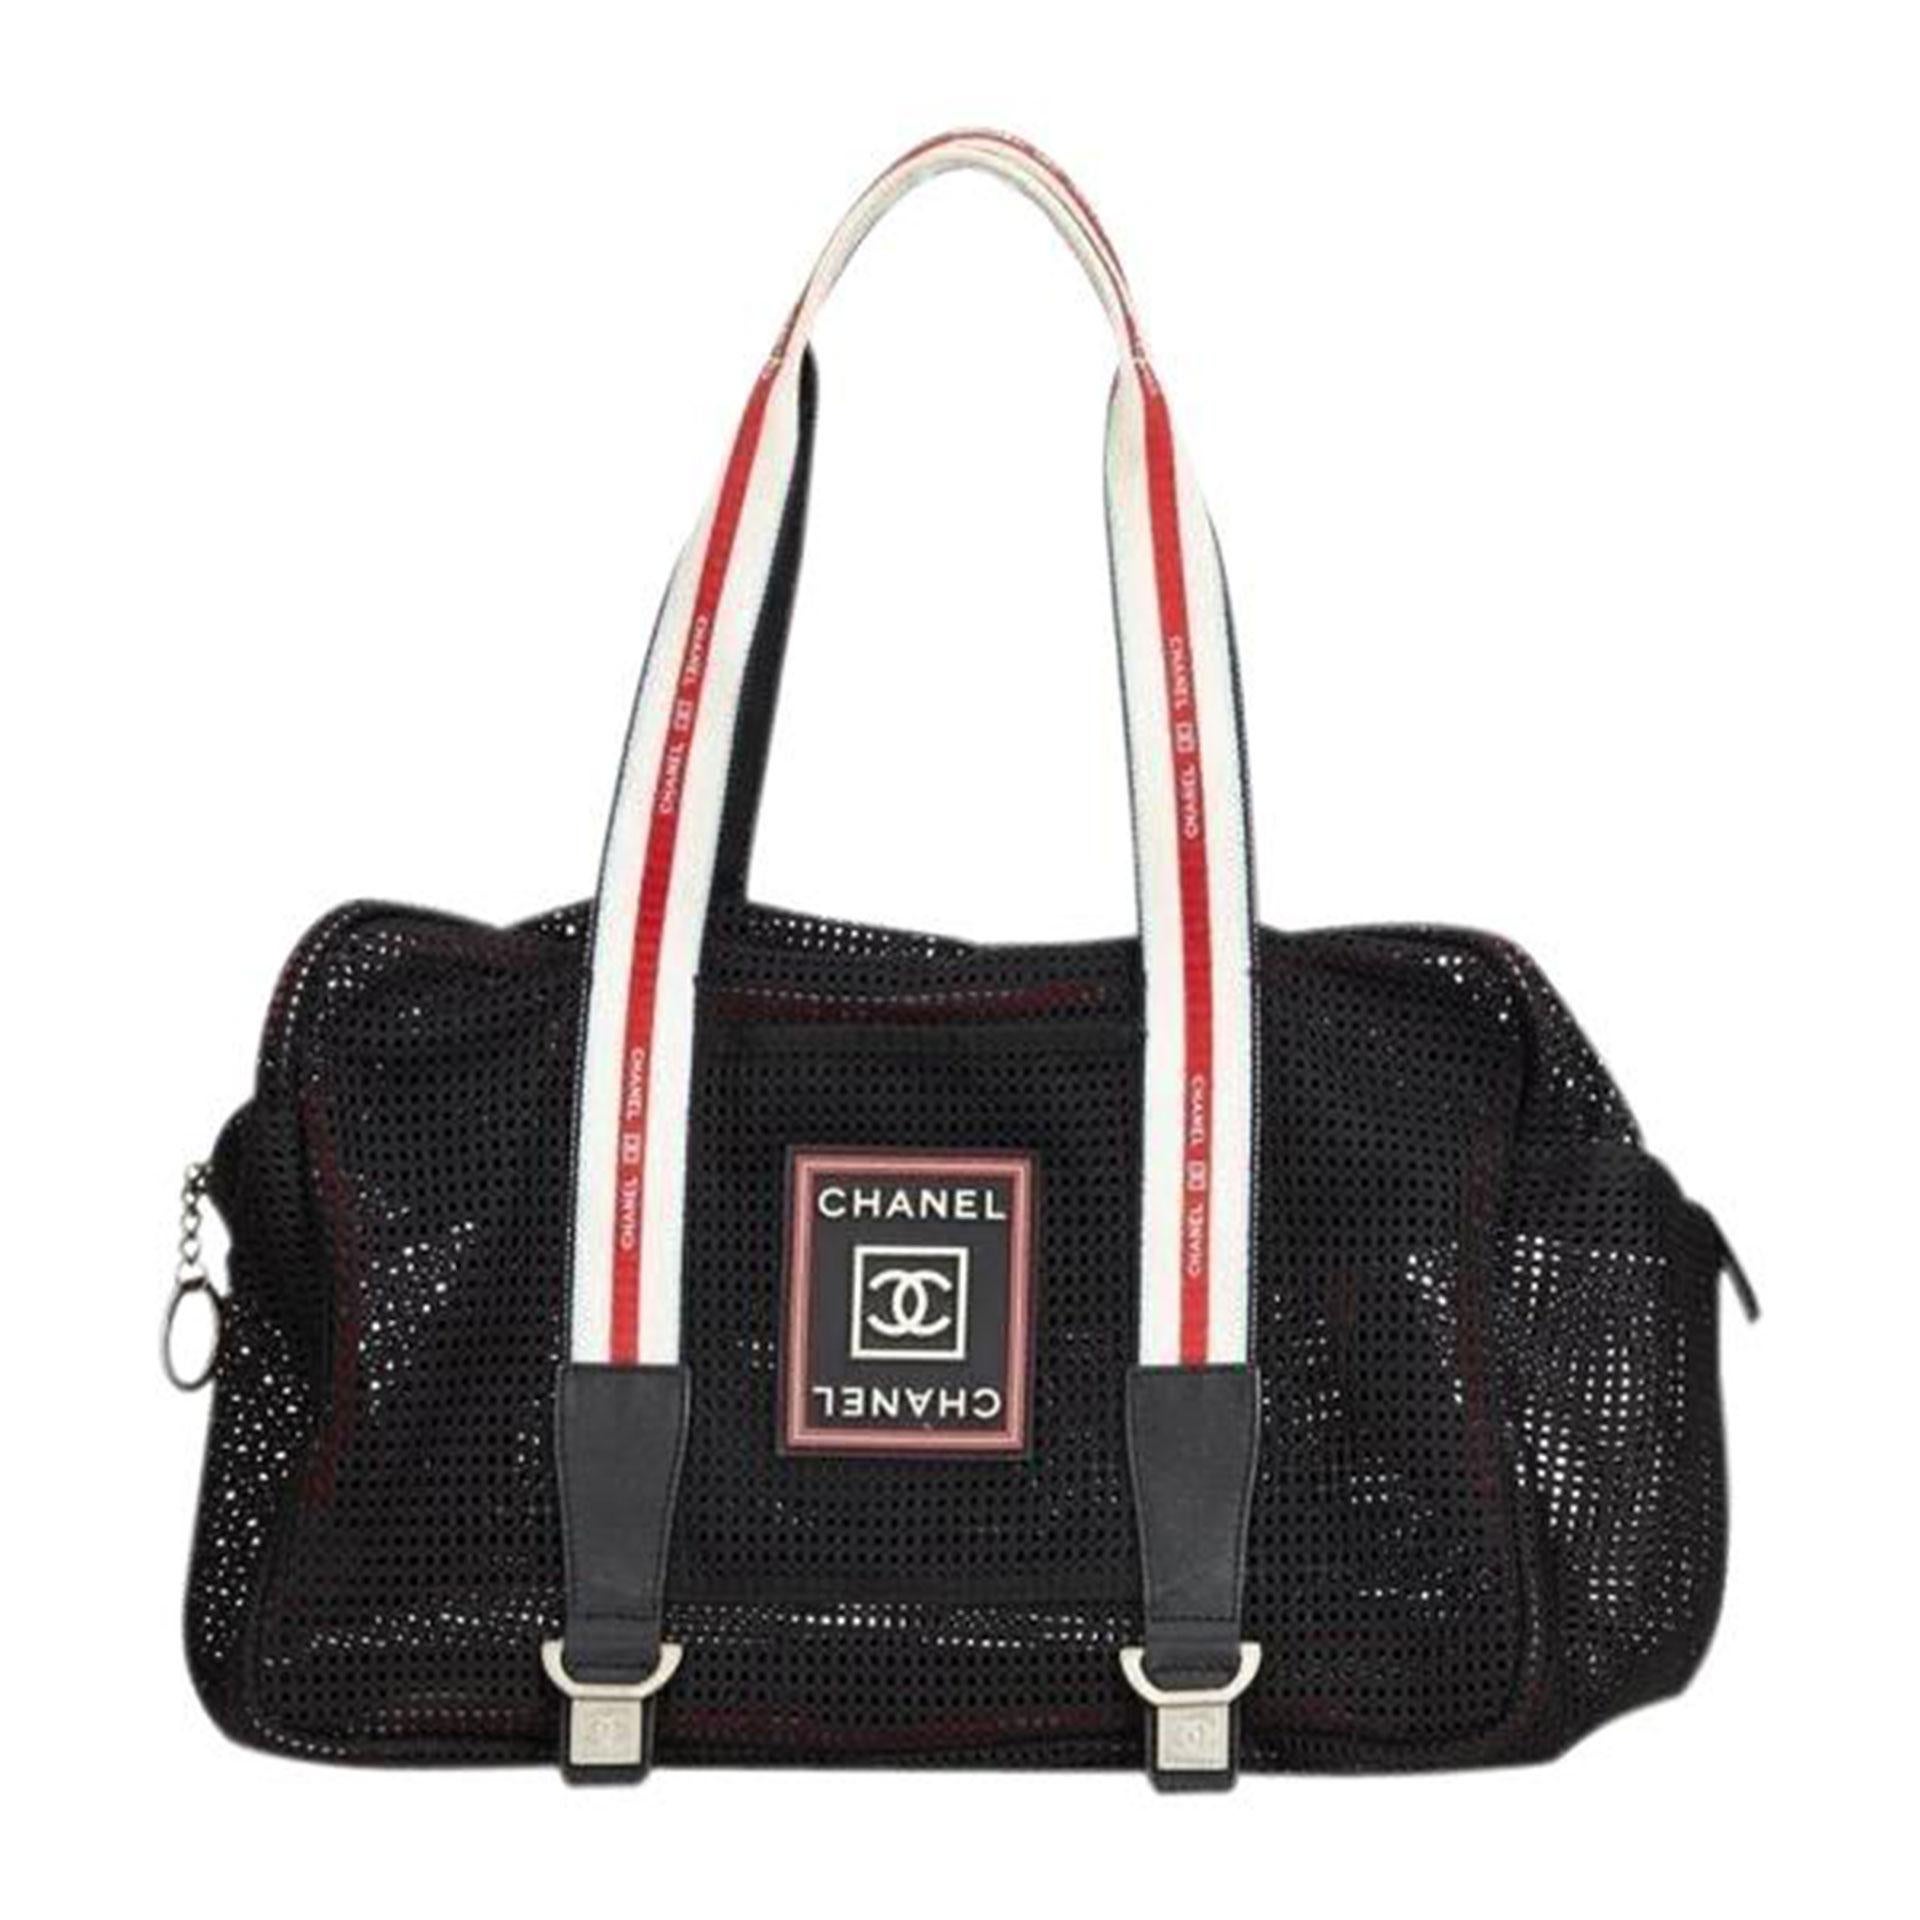 Medium sized Chanel black mesh sport bag with expandable snap detail

2006 {VINTAGE 16 Years}
Silver hardware
Lambskin leather detail
Rubber Chanel stamped logo
Zipper closure
Interior red sport trim
Large interior center pocket
Strap drop: 8”
8” H